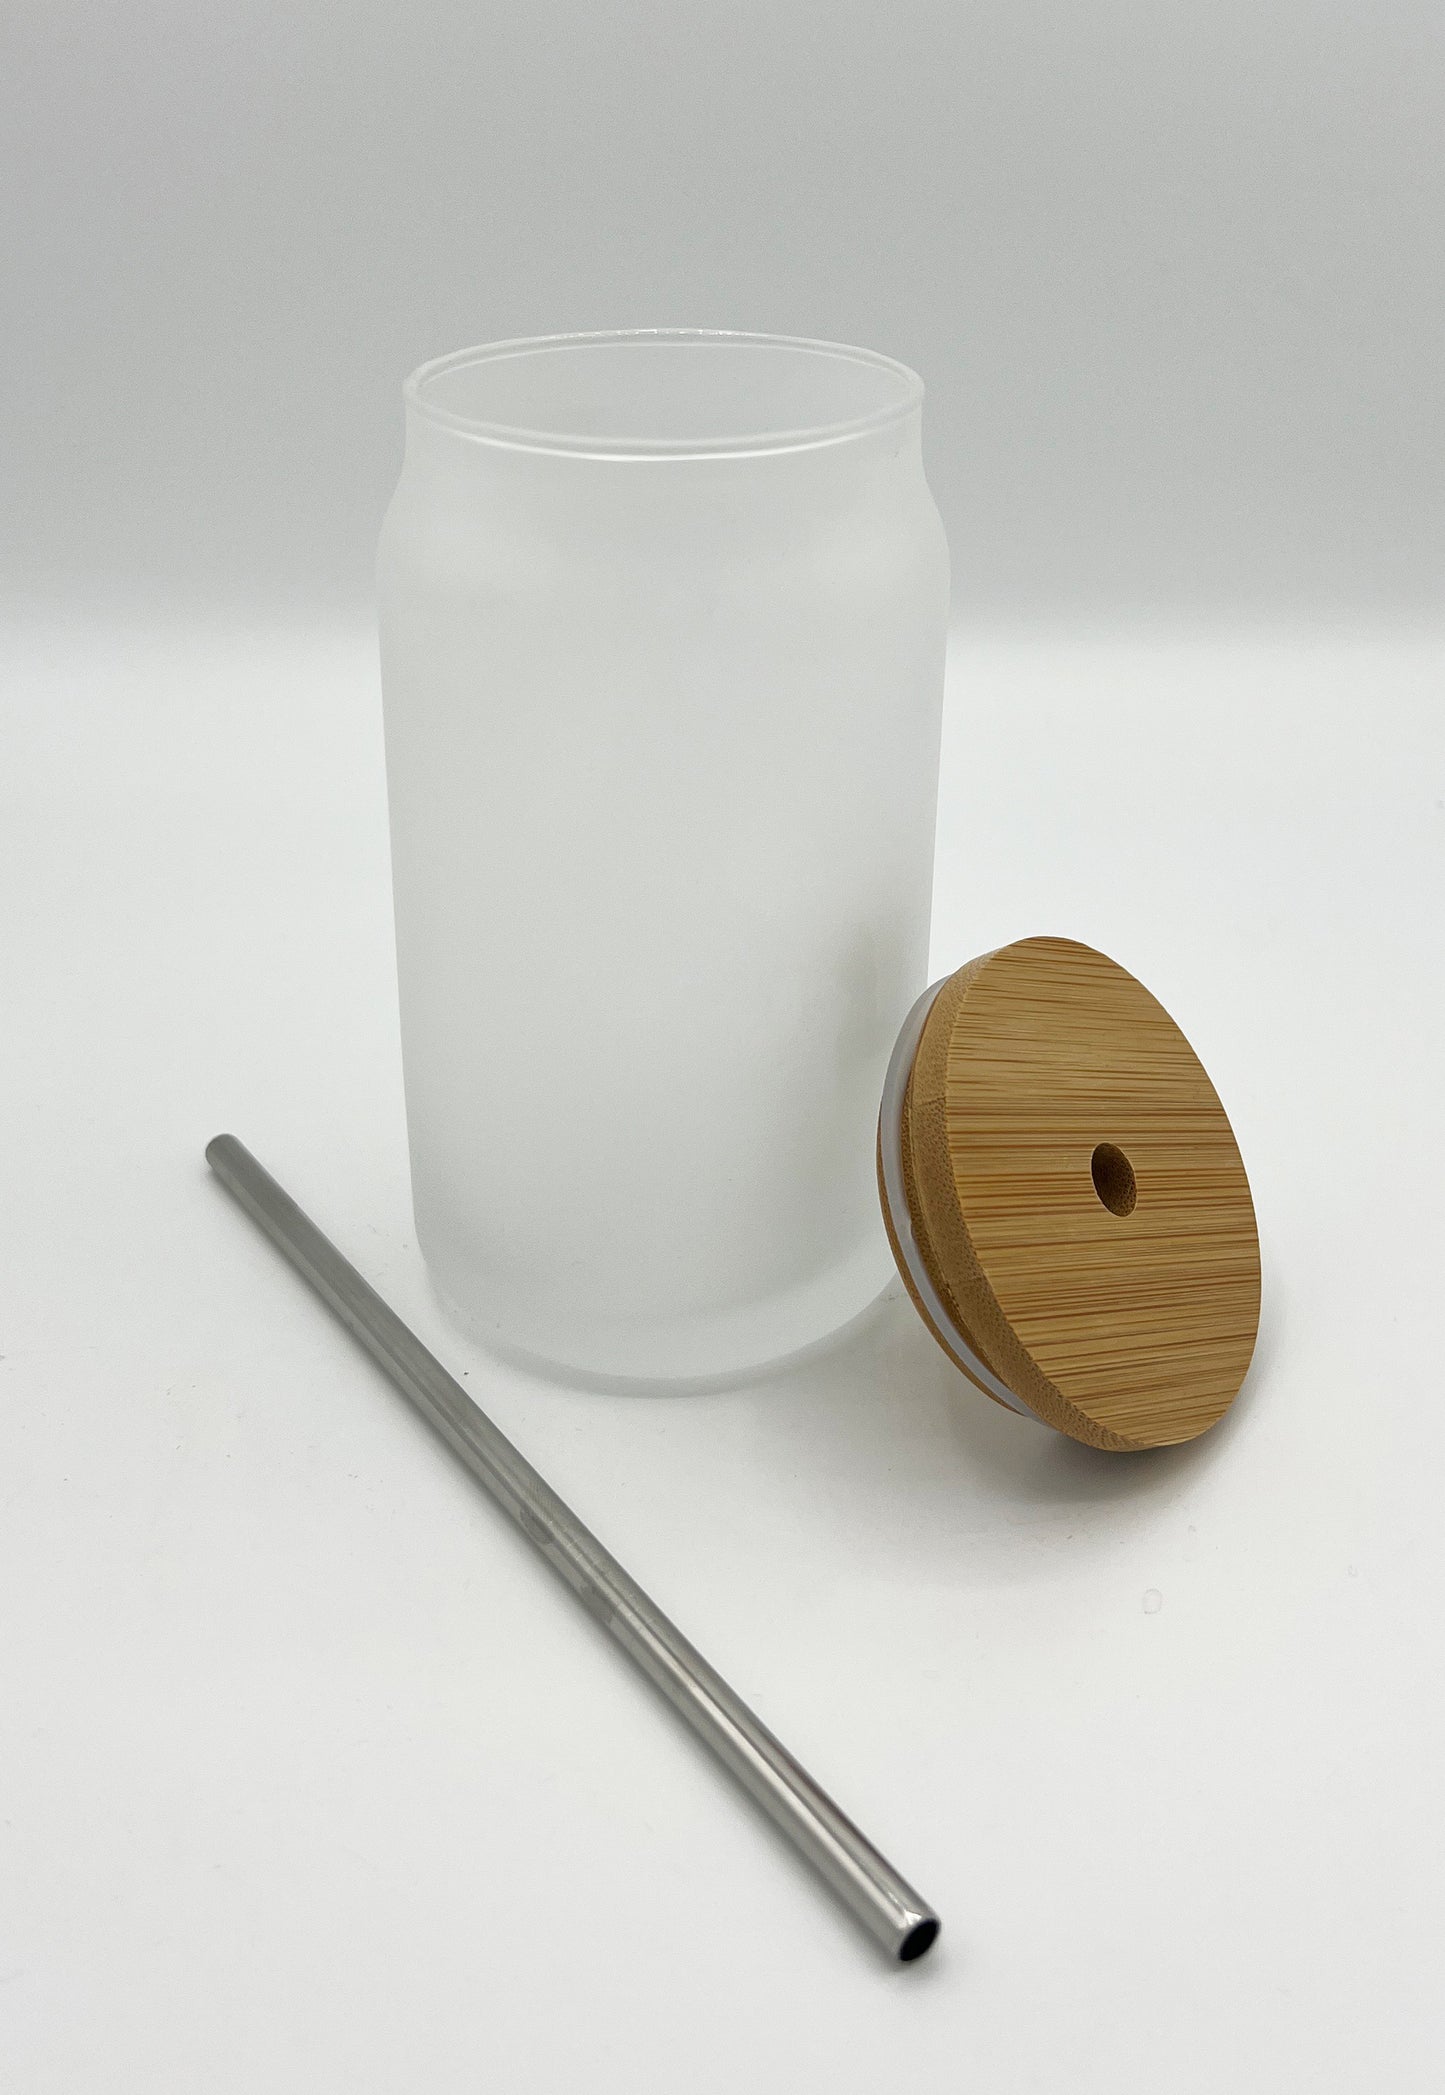 Glass with satin-finished bamboo lid and drinking straw